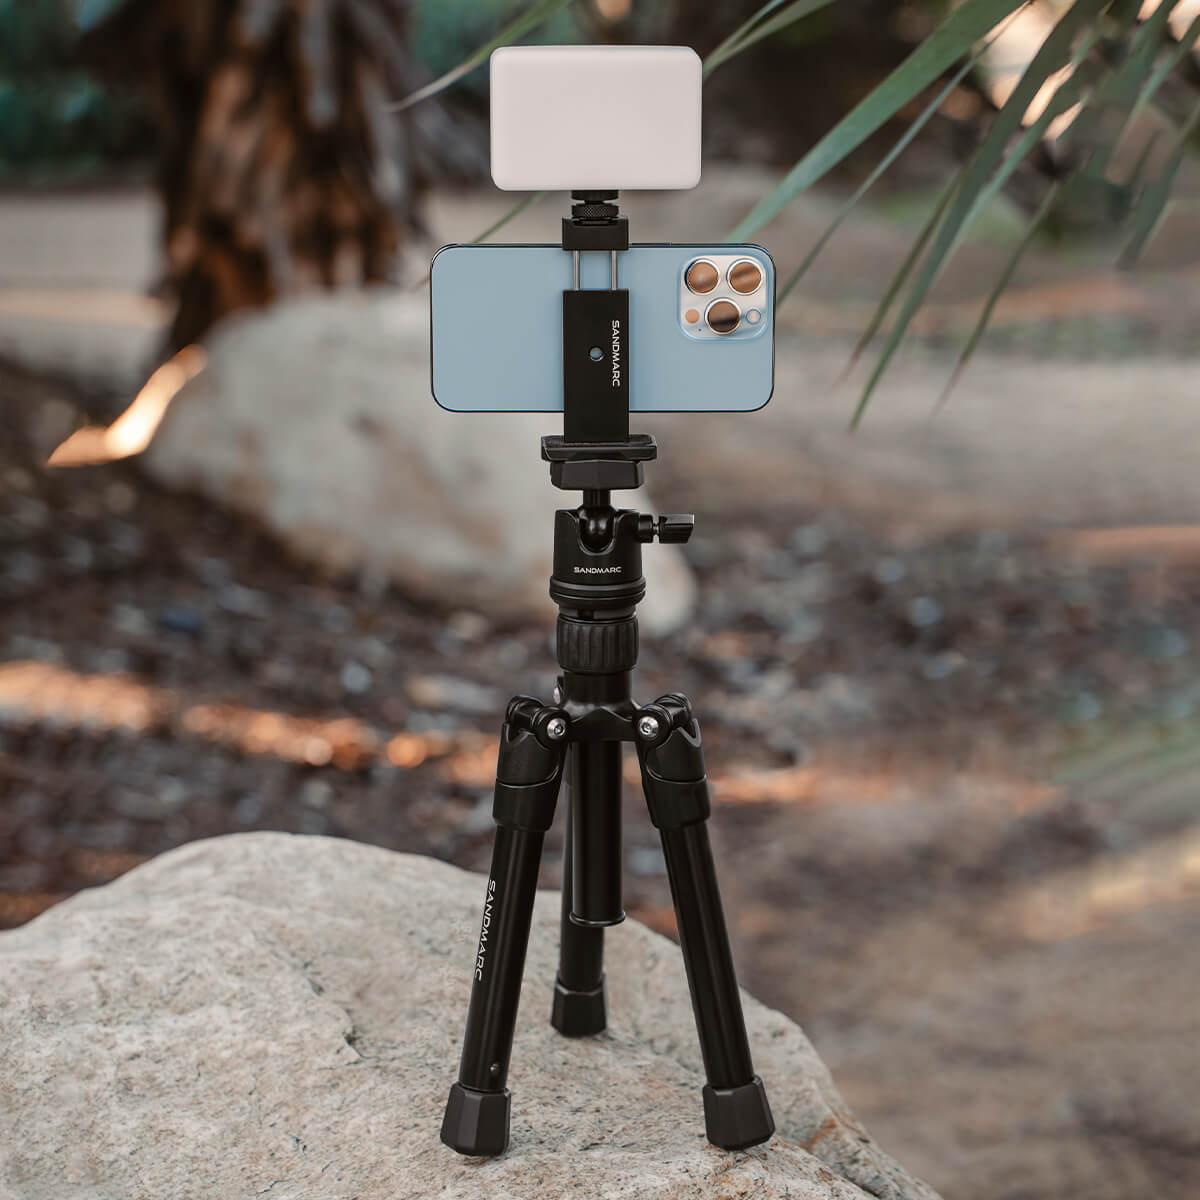 How to: Make a Simple + Clever iPhone Tripod Mount